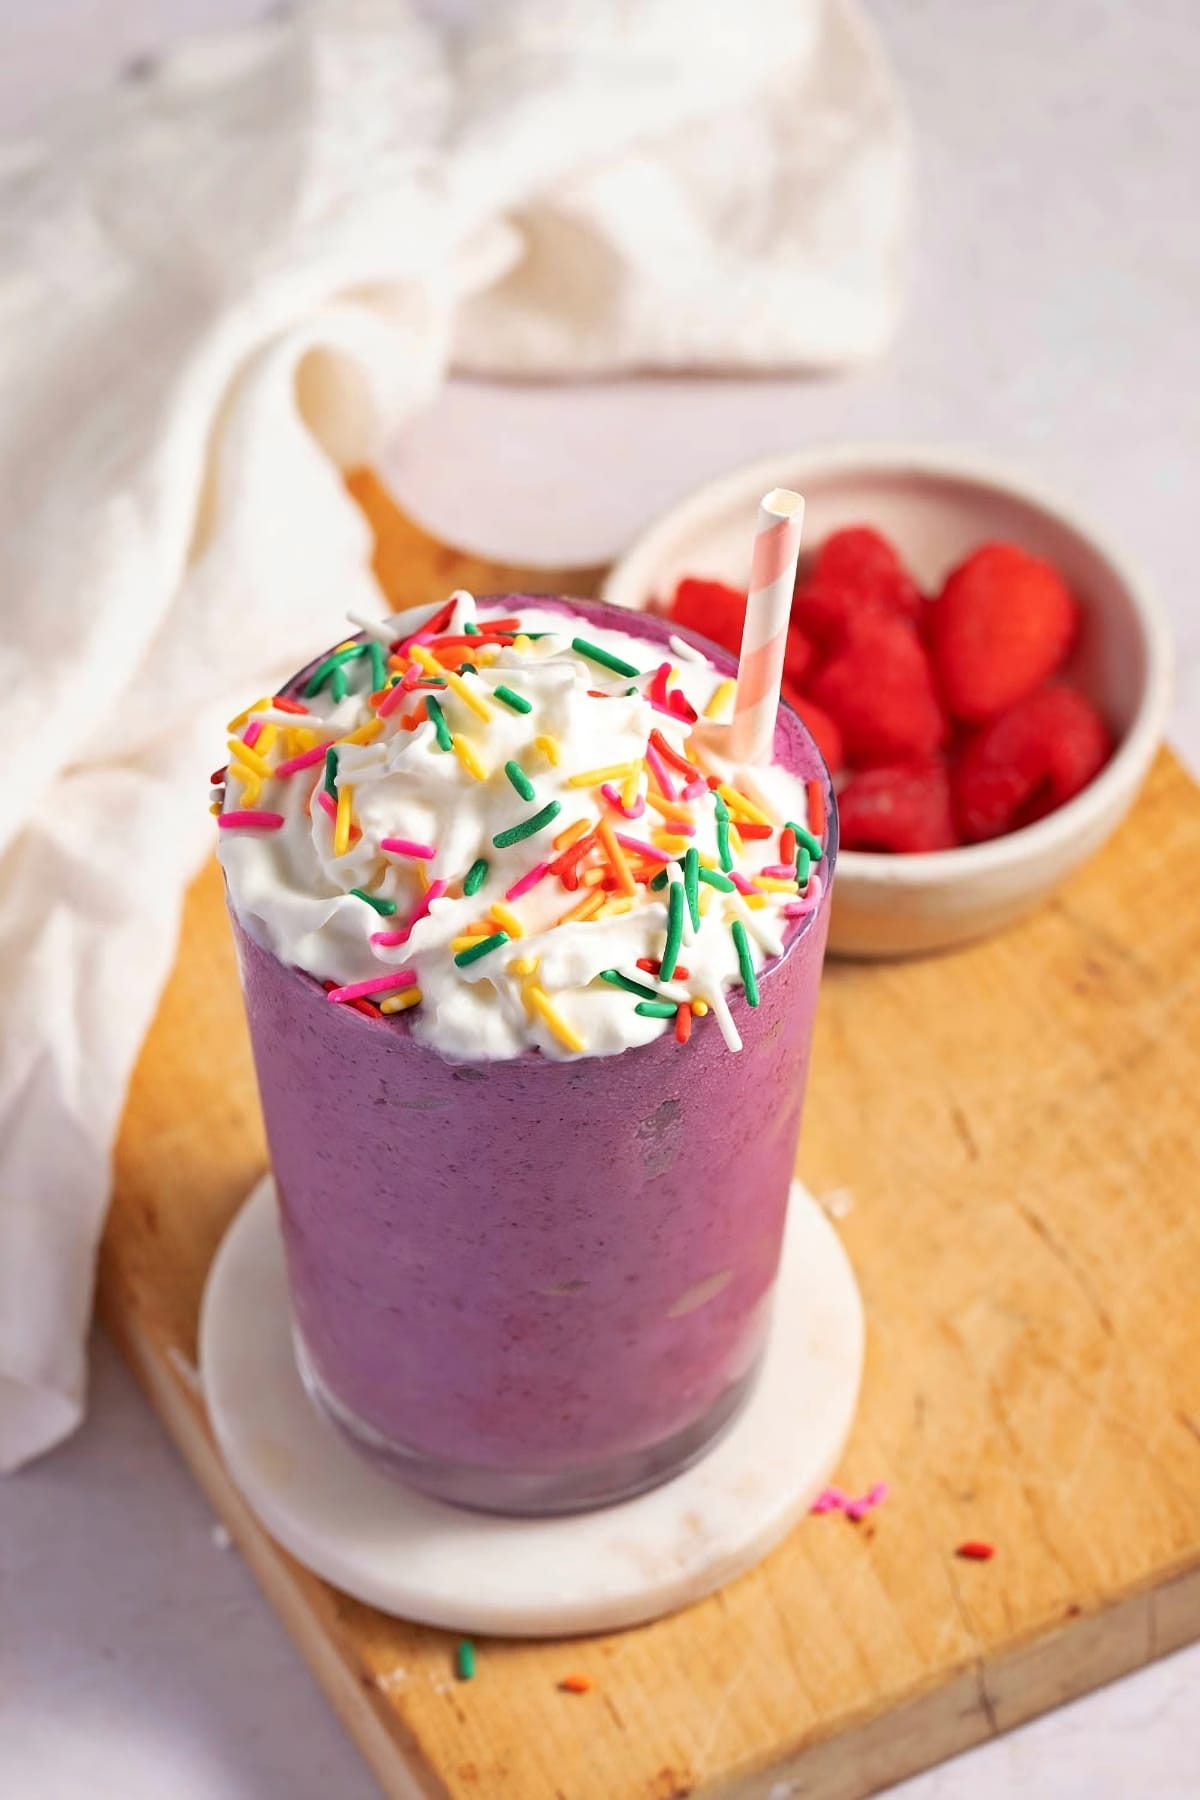 Homemade Grimace Shake with Whipped Cream, Sprinkles, and Fresh Raspberries in the Background